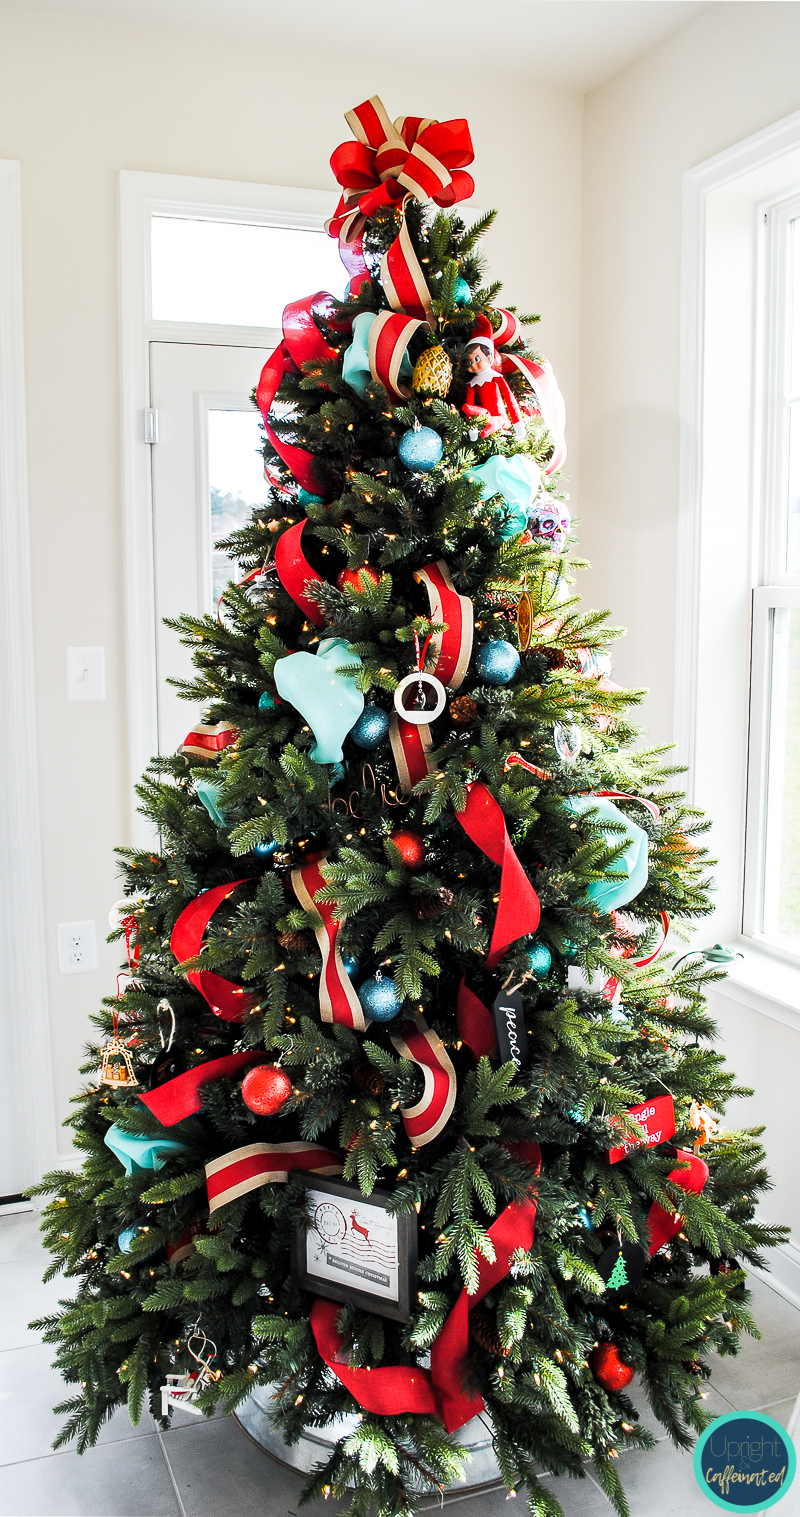 How Much Ribbon for Christmas Tree? (+ All Things Ribbon!) - A Pop